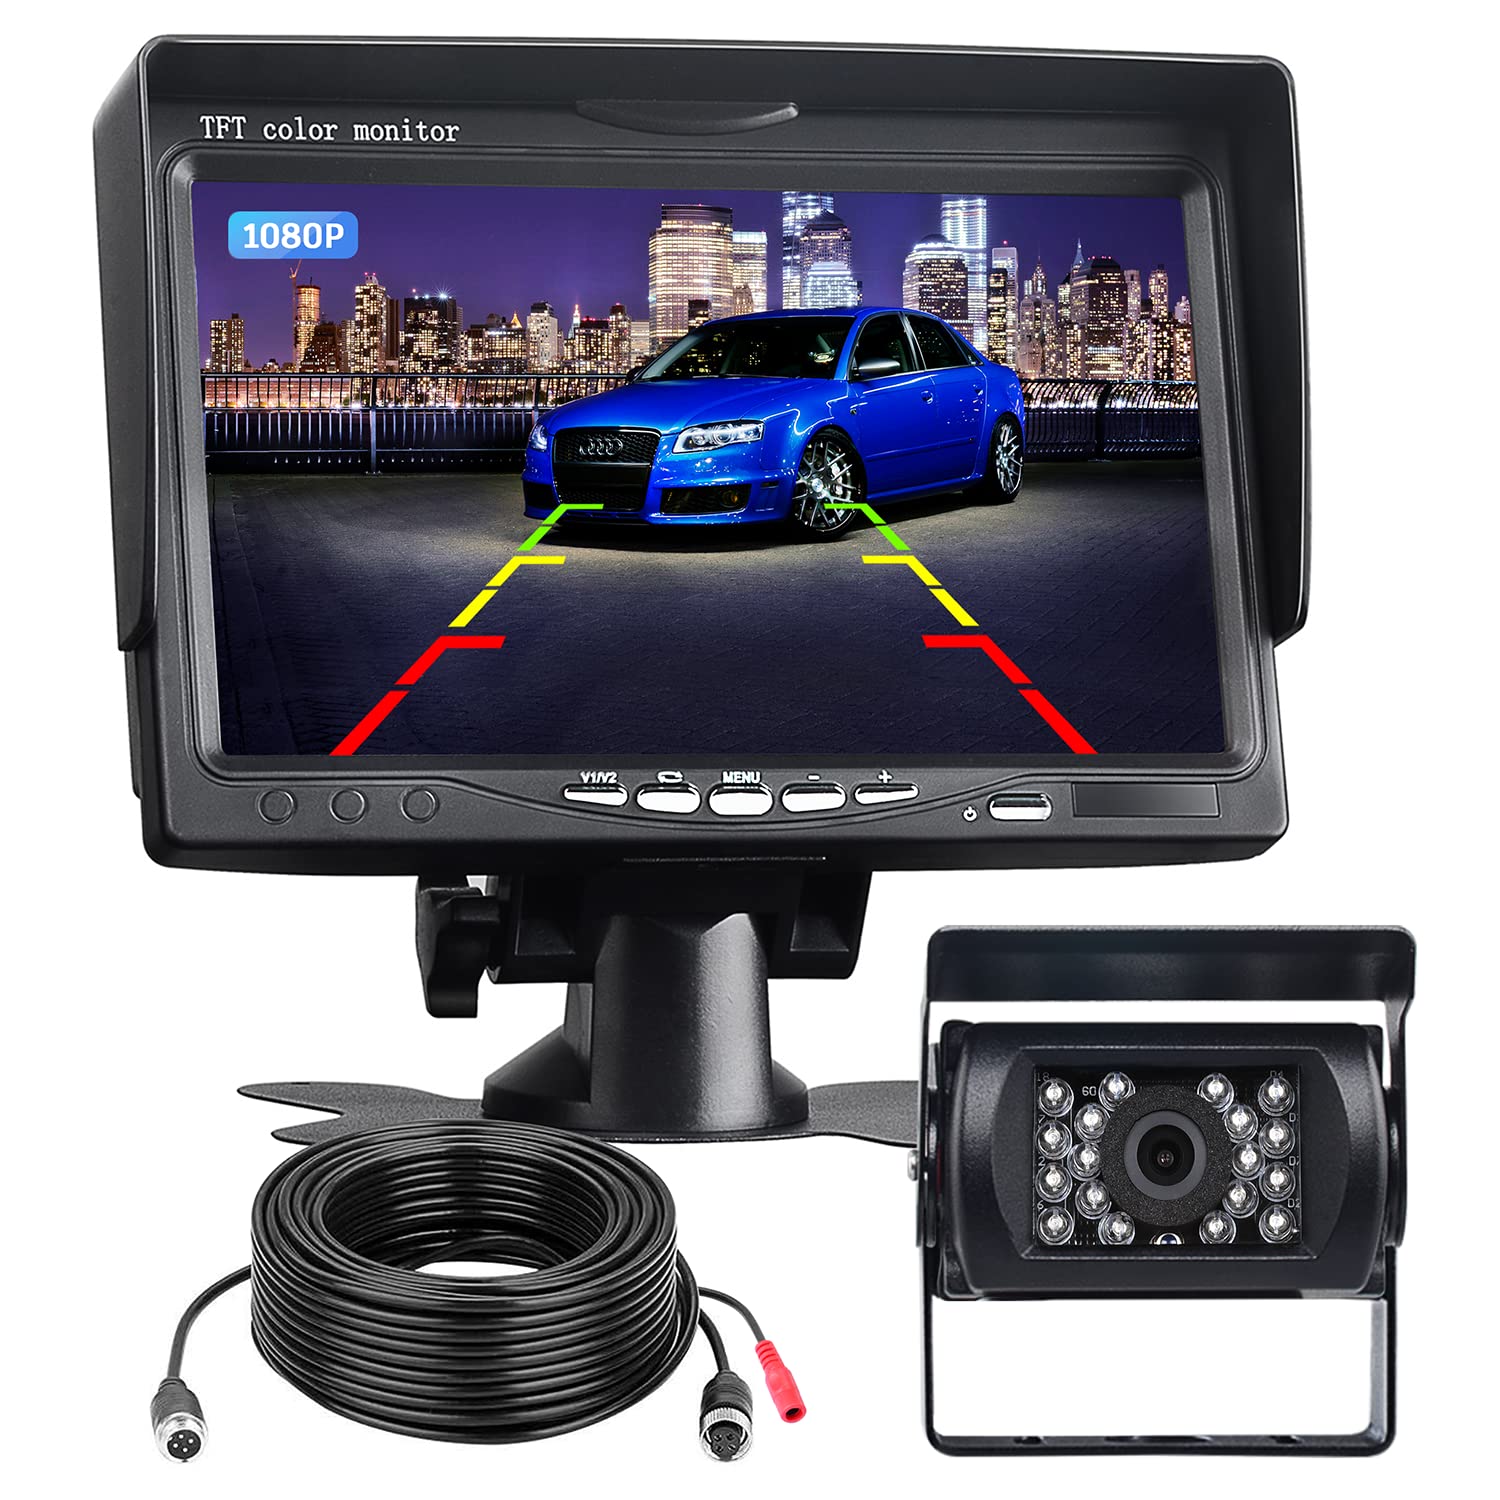 Backup Camera System, Rear View Camera 7'' Monitor Kit FHD 1080P Back Up Camera for Car Truck RV Minivan Waterproof Night Vision, Dual Channel Easy to Install Wired Camera